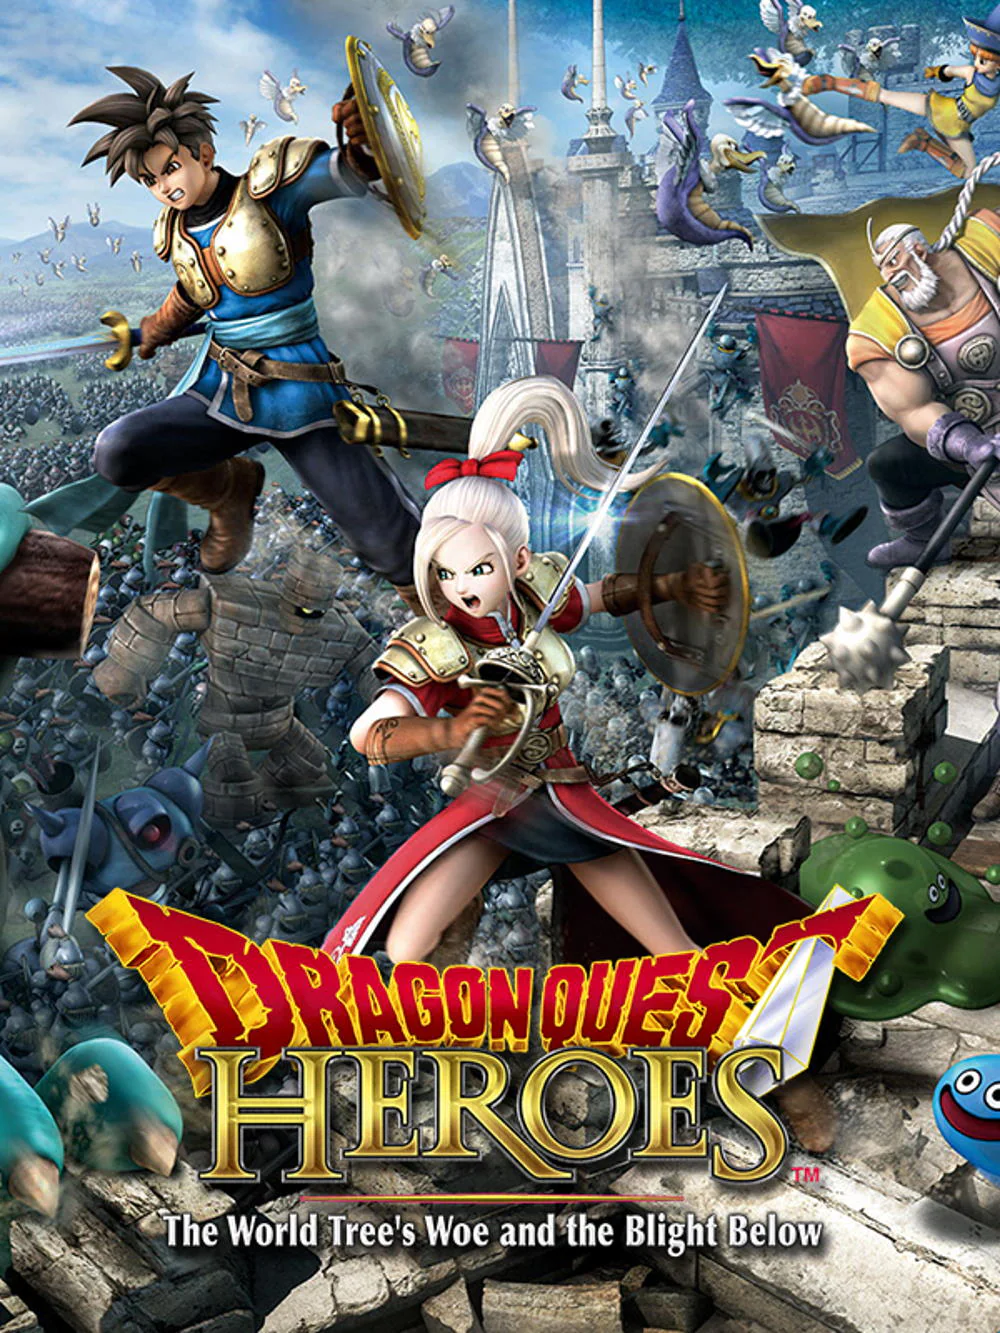 Dragon Quest Heroes The World Tree's Woe and the Blight Below (PC) - Steam - Digital Code